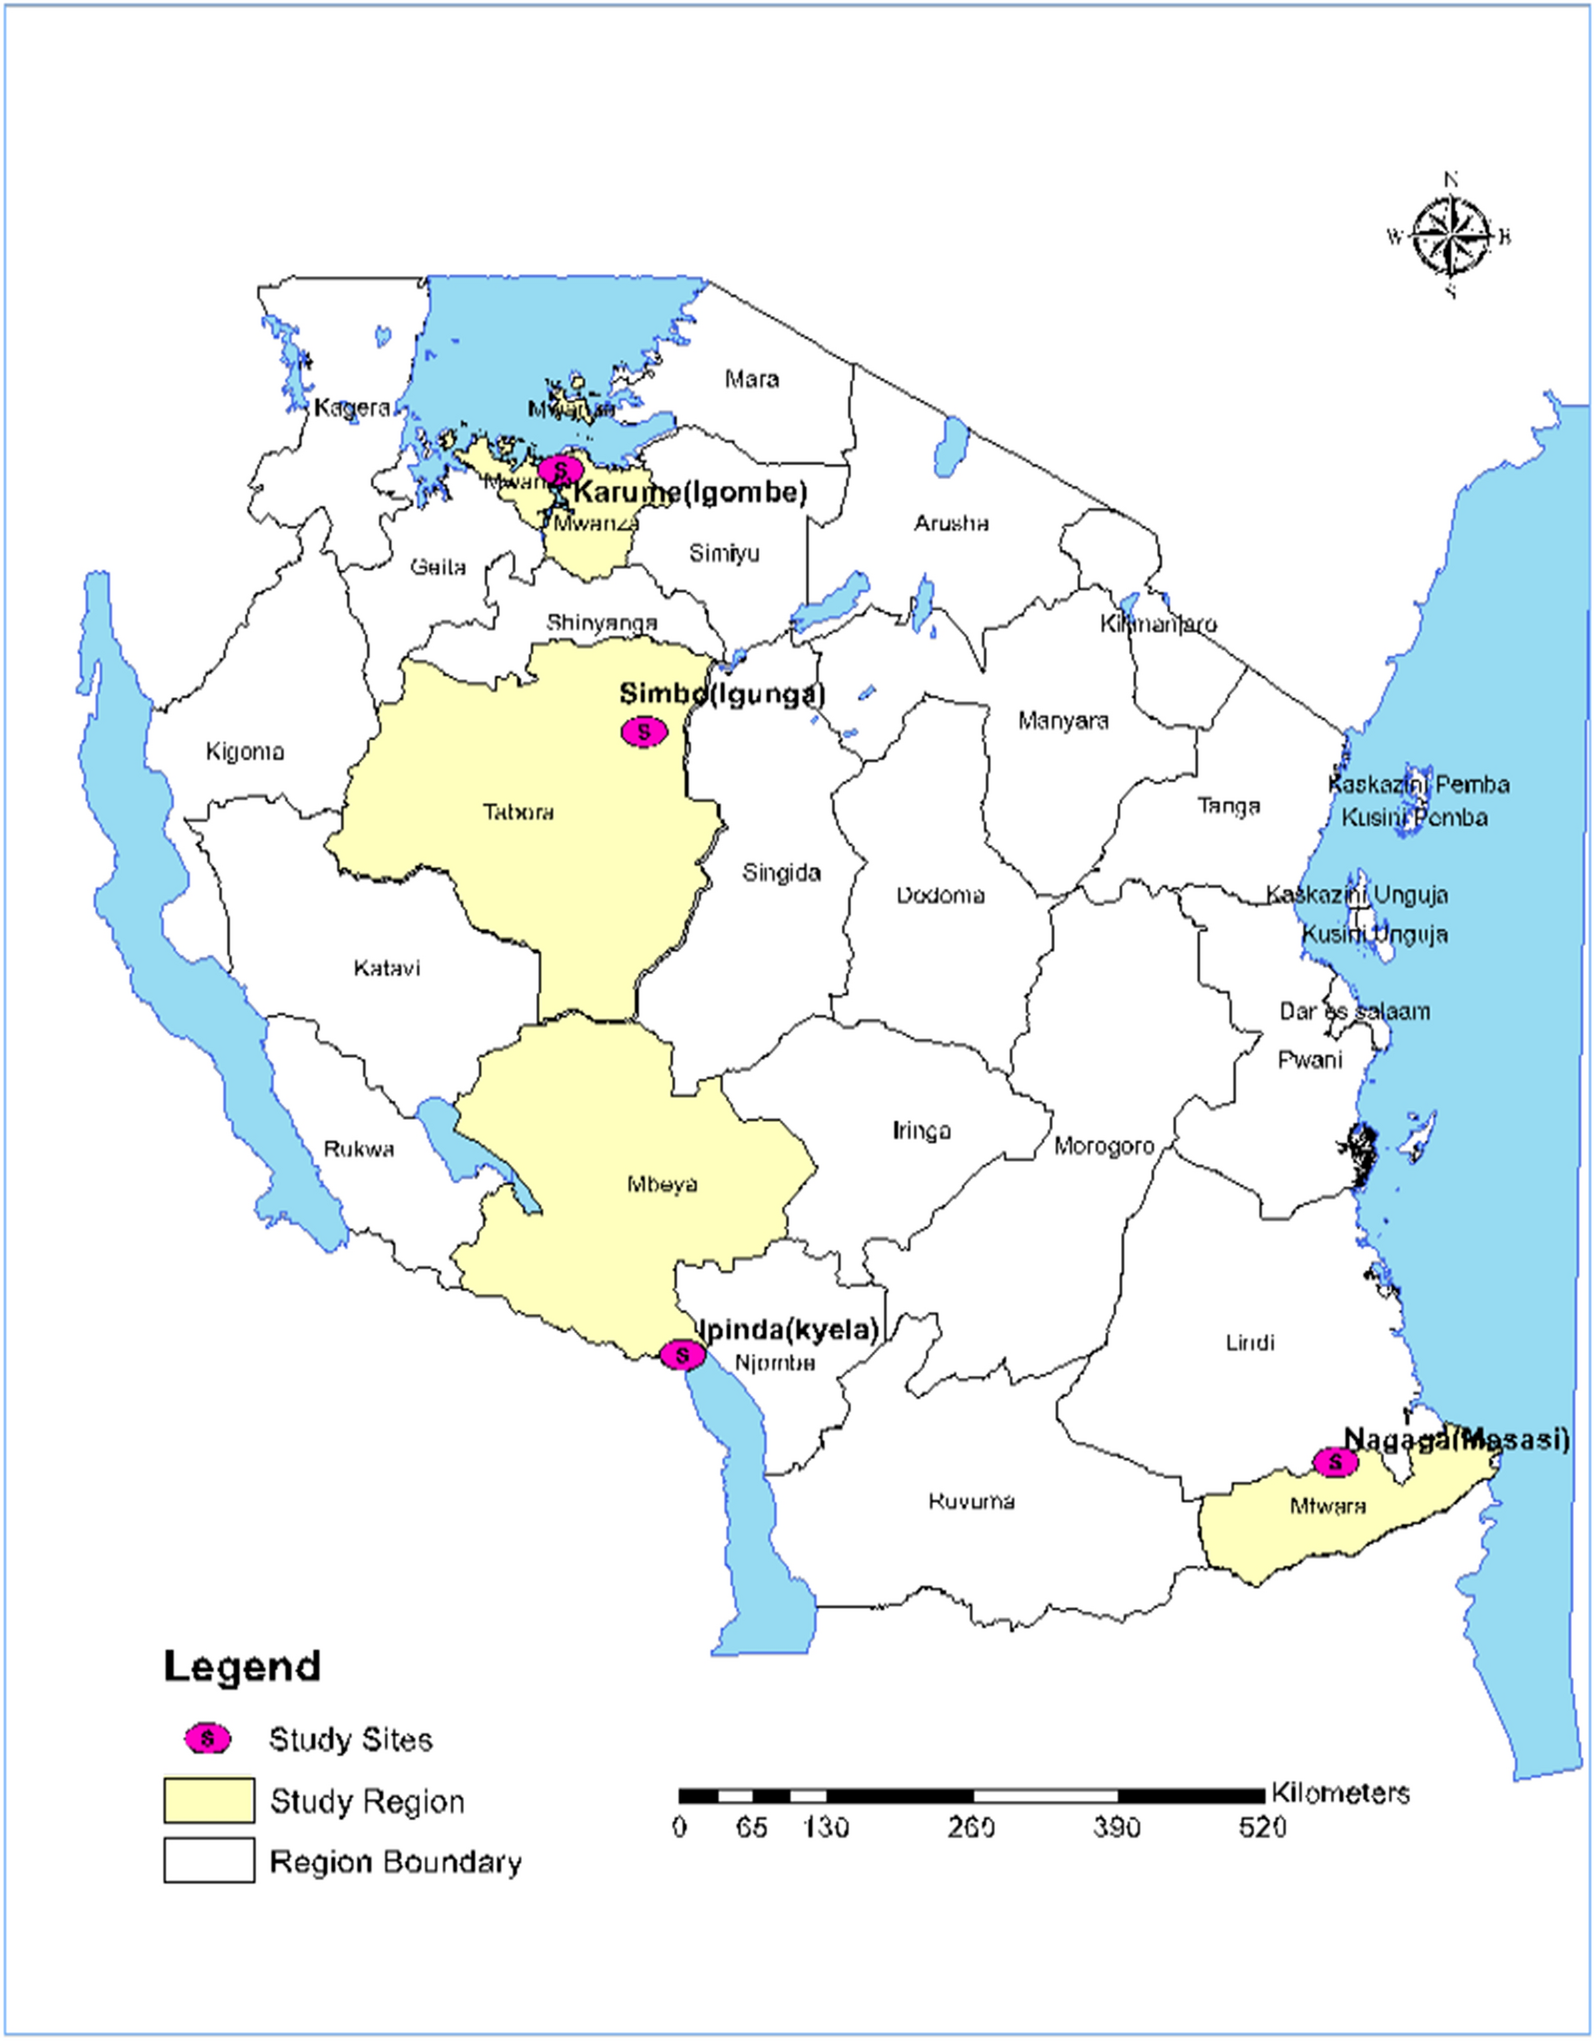 Efficacy and safety of artemether-lumefantrine for the treatment of uncomplicated falciparum malaria in mainland Tanzania, 2019